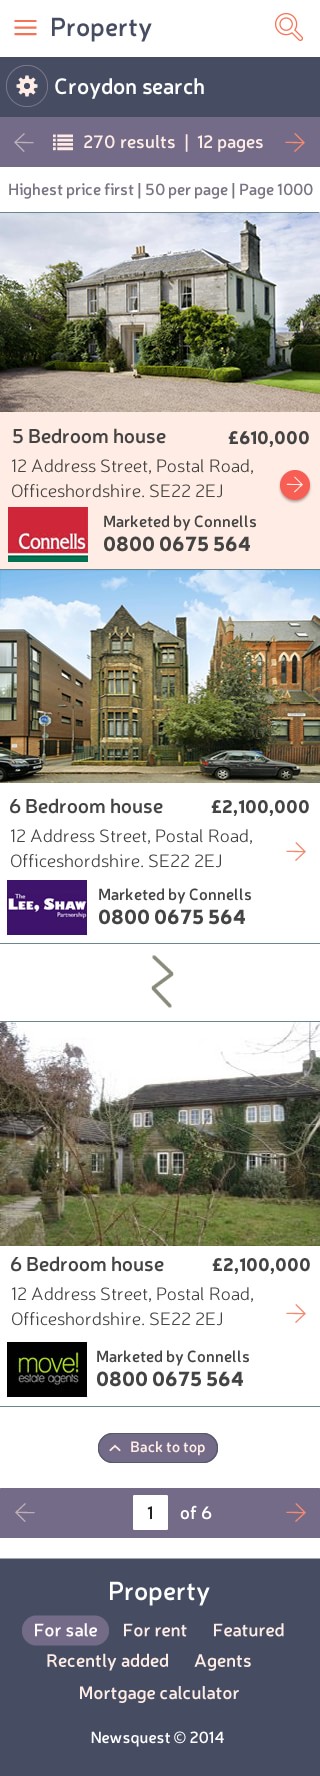 Property search page mobile breakpoint